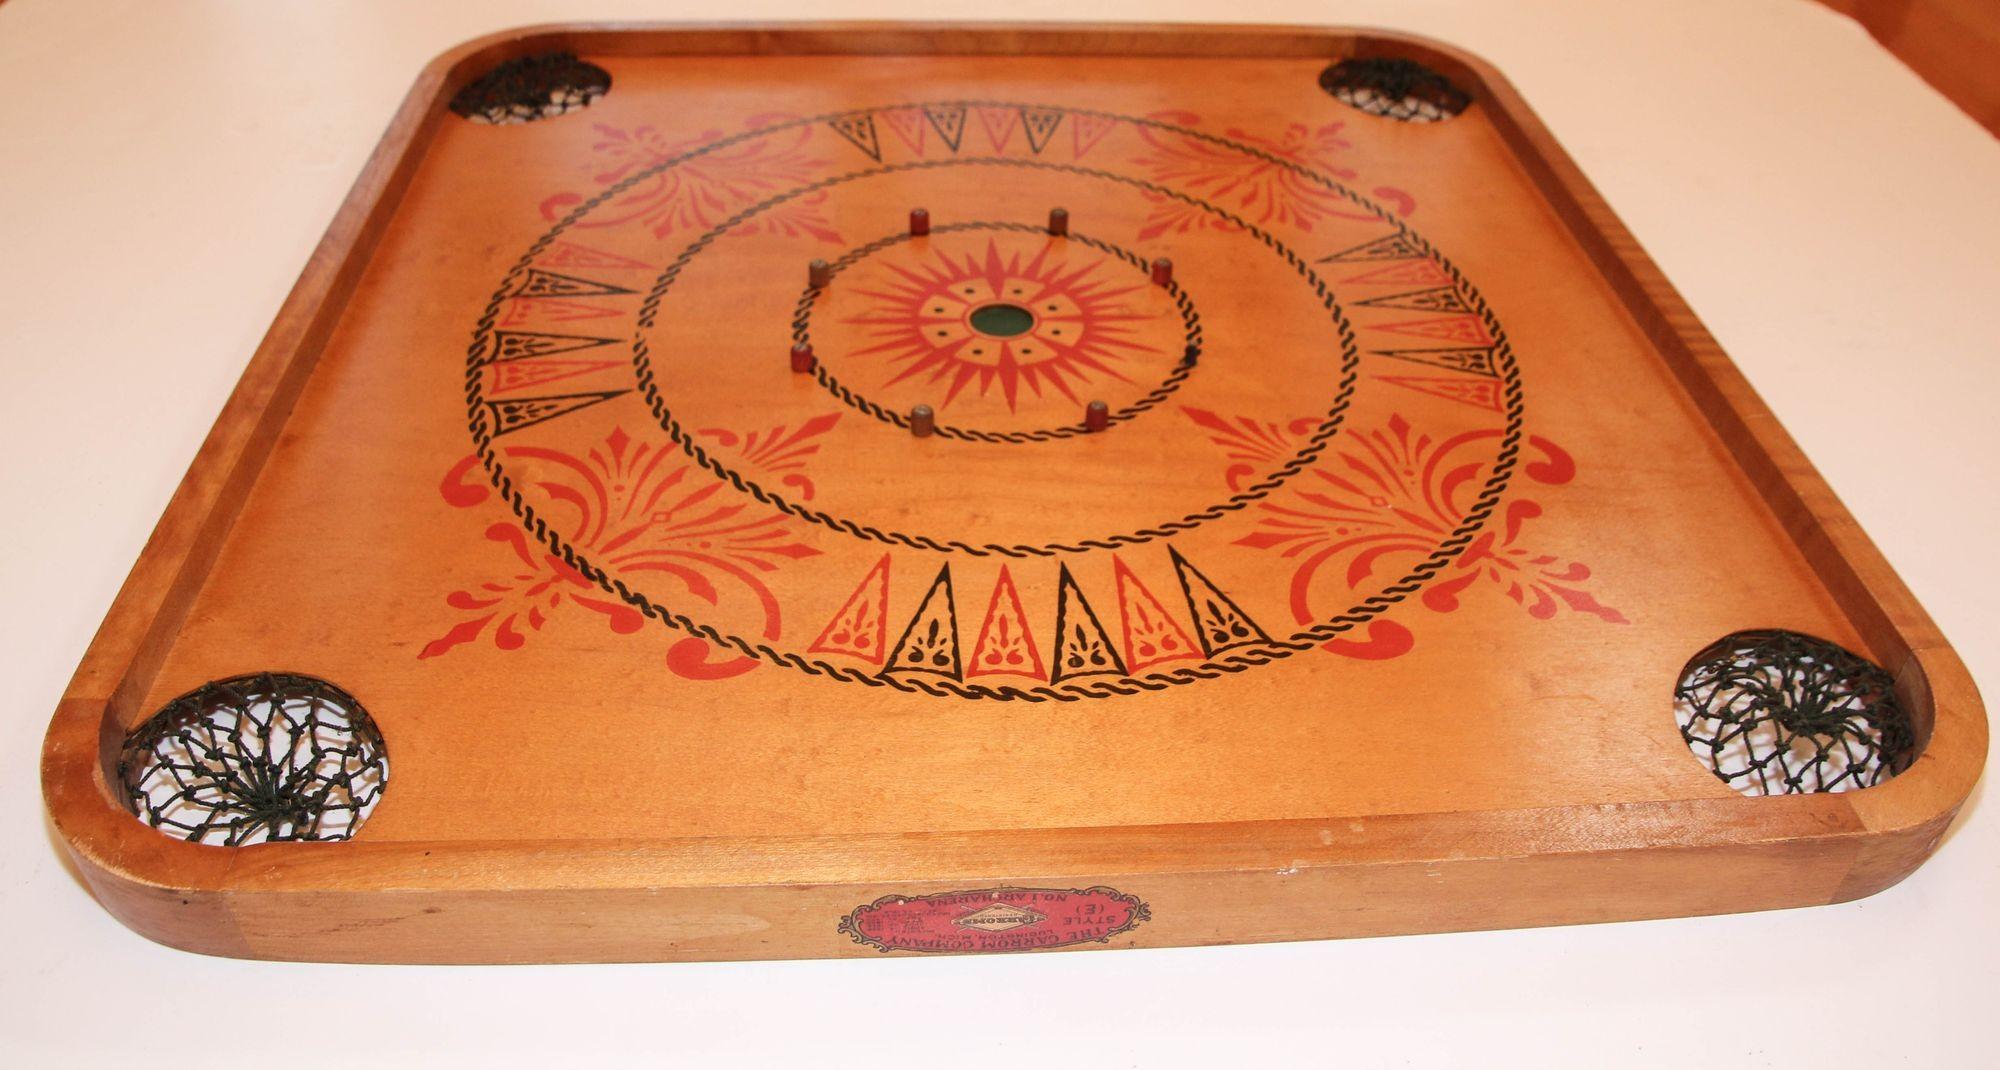 Antique carrom large wooden game board double-sided no. 1 Archarena Style (E).
Antique Carrom Company 1907 Wood Game Board Double Sided, made in USA.
This antique Carrom-Archarena Co. wooden game board is double-sided with original decals.
Each